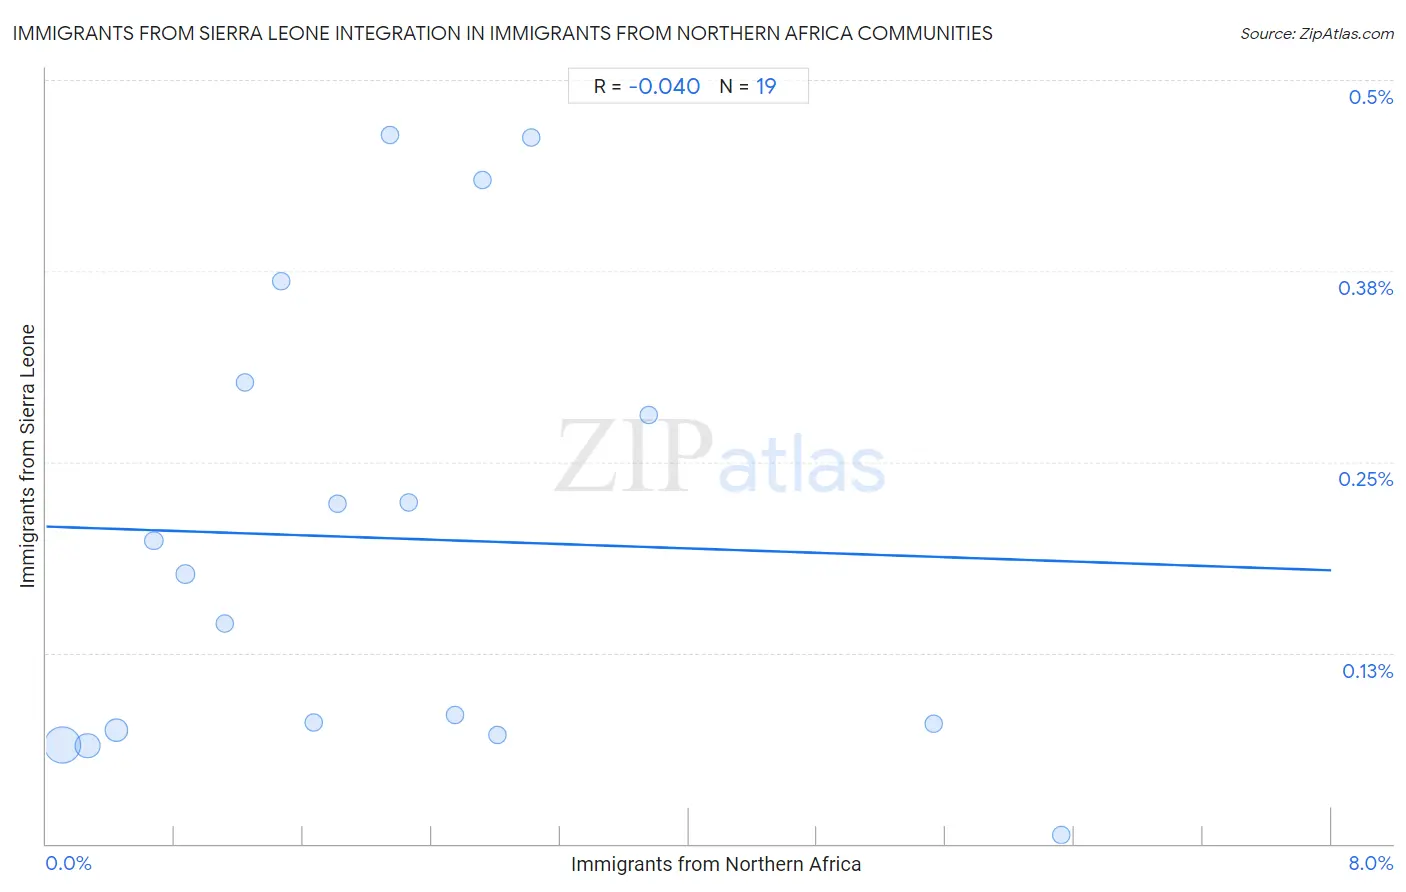 Immigrants from Northern Africa Integration in Immigrants from Sierra Leone Communities